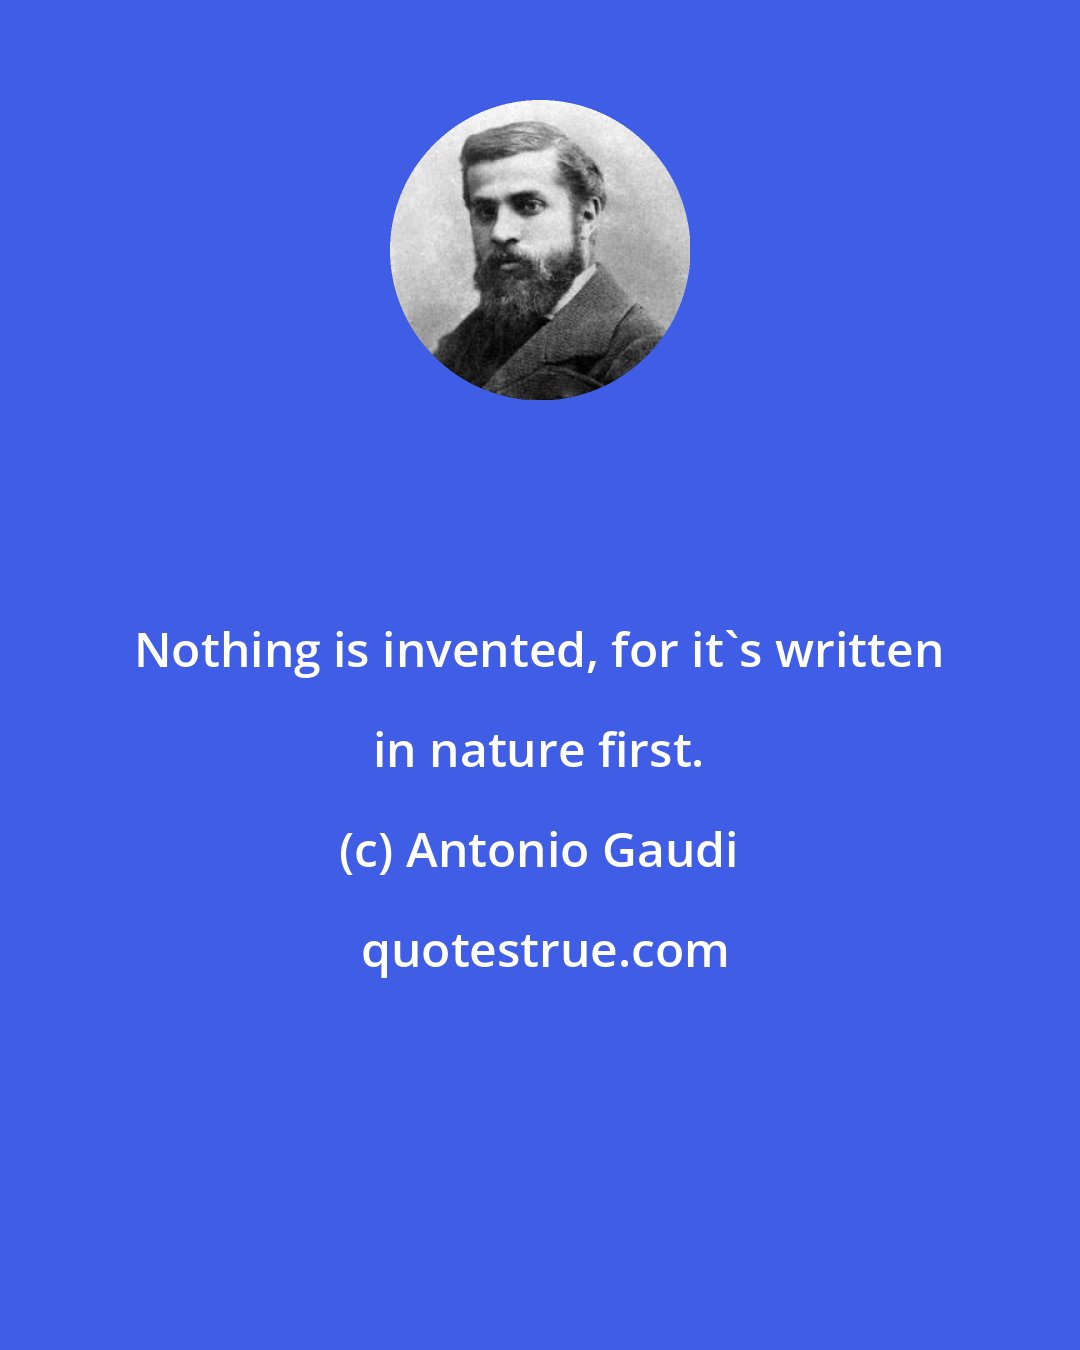 Antonio Gaudi: Nothing is invented, for it's written in nature first.